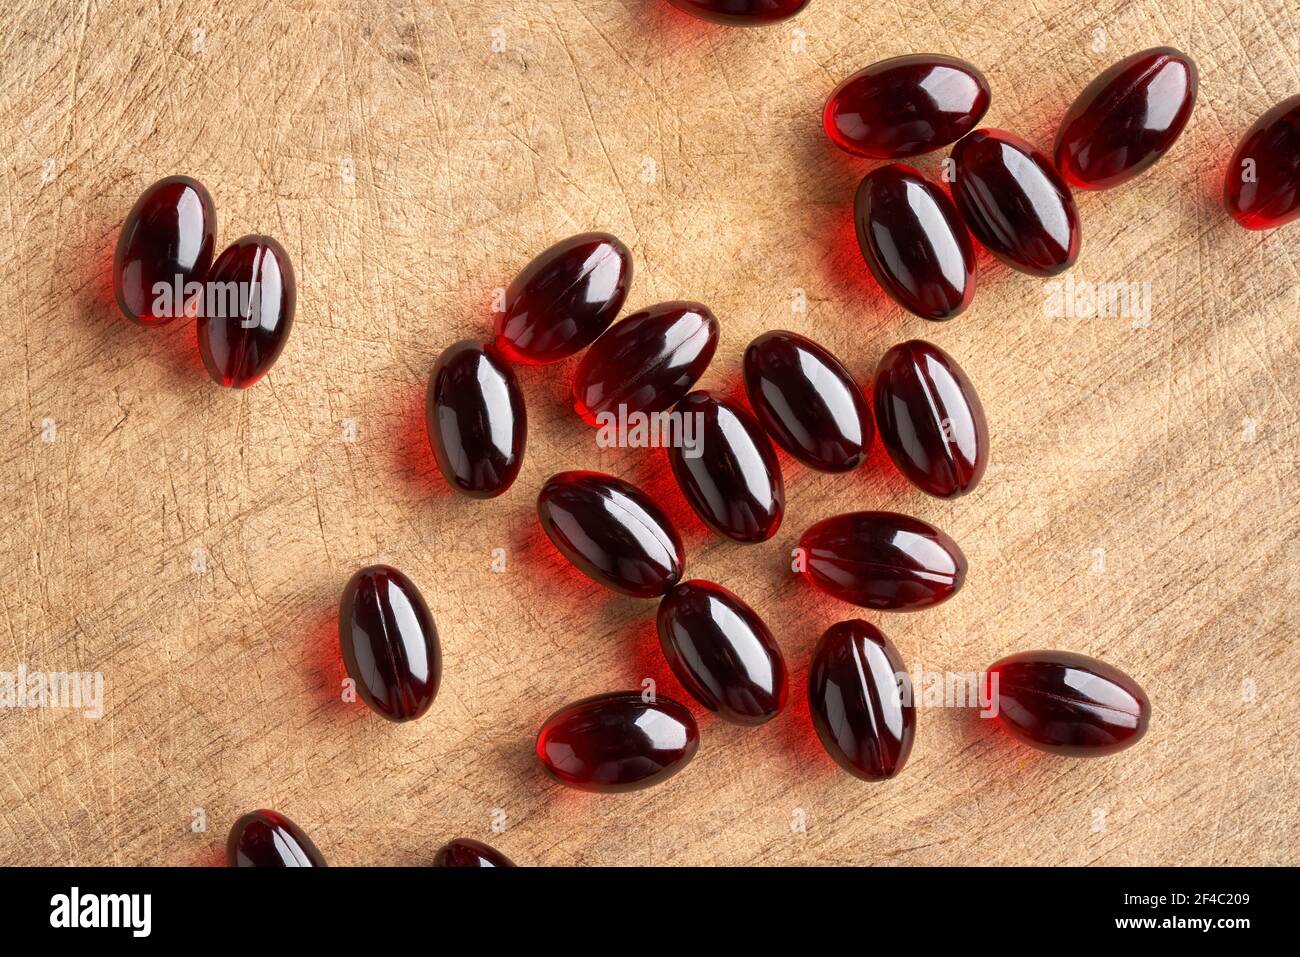 Krill oil pills on a wooden table, top view Stock Photo